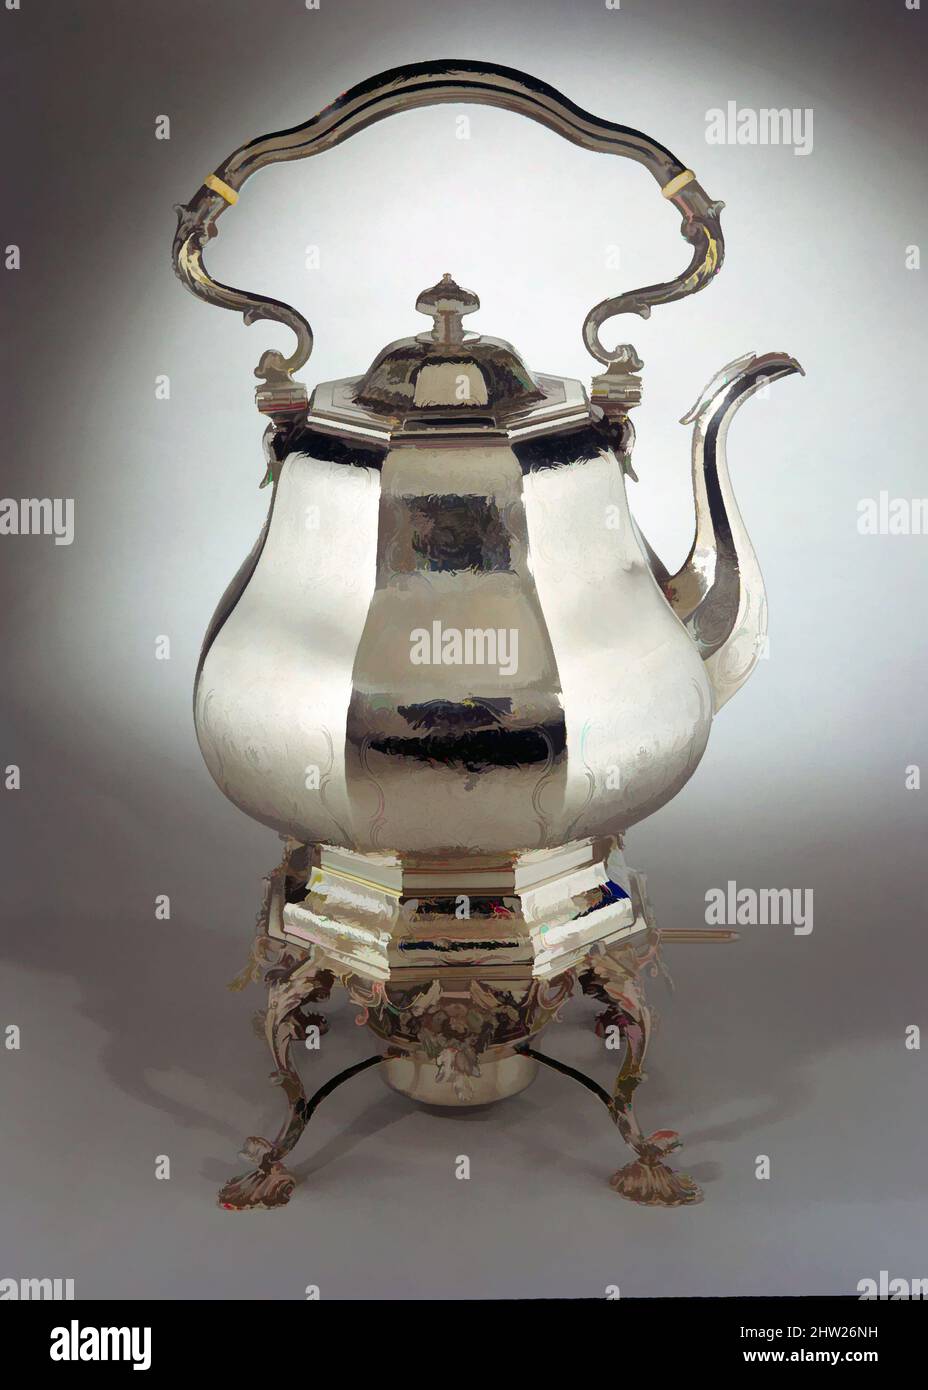 Art inspired by Teakettle, ca. 1840, Made in New York, New York, United States, American, Silver and ivory, Overall: 15 3/4 x 9 5/16 in. (40 x 23.7 cm); 68 oz. 4 dwt. (2120.7 g), Silver, William Forbes (baptized 1799, active New York, 1826–63, Classic works modernized by Artotop with a splash of modernity. Shapes, color and value, eye-catching visual impact on art. Emotions through freedom of artworks in a contemporary way. A timeless message pursuing a wildly creative new direction. Artists turning to the digital medium and creating the Artotop NFT Stock Photo